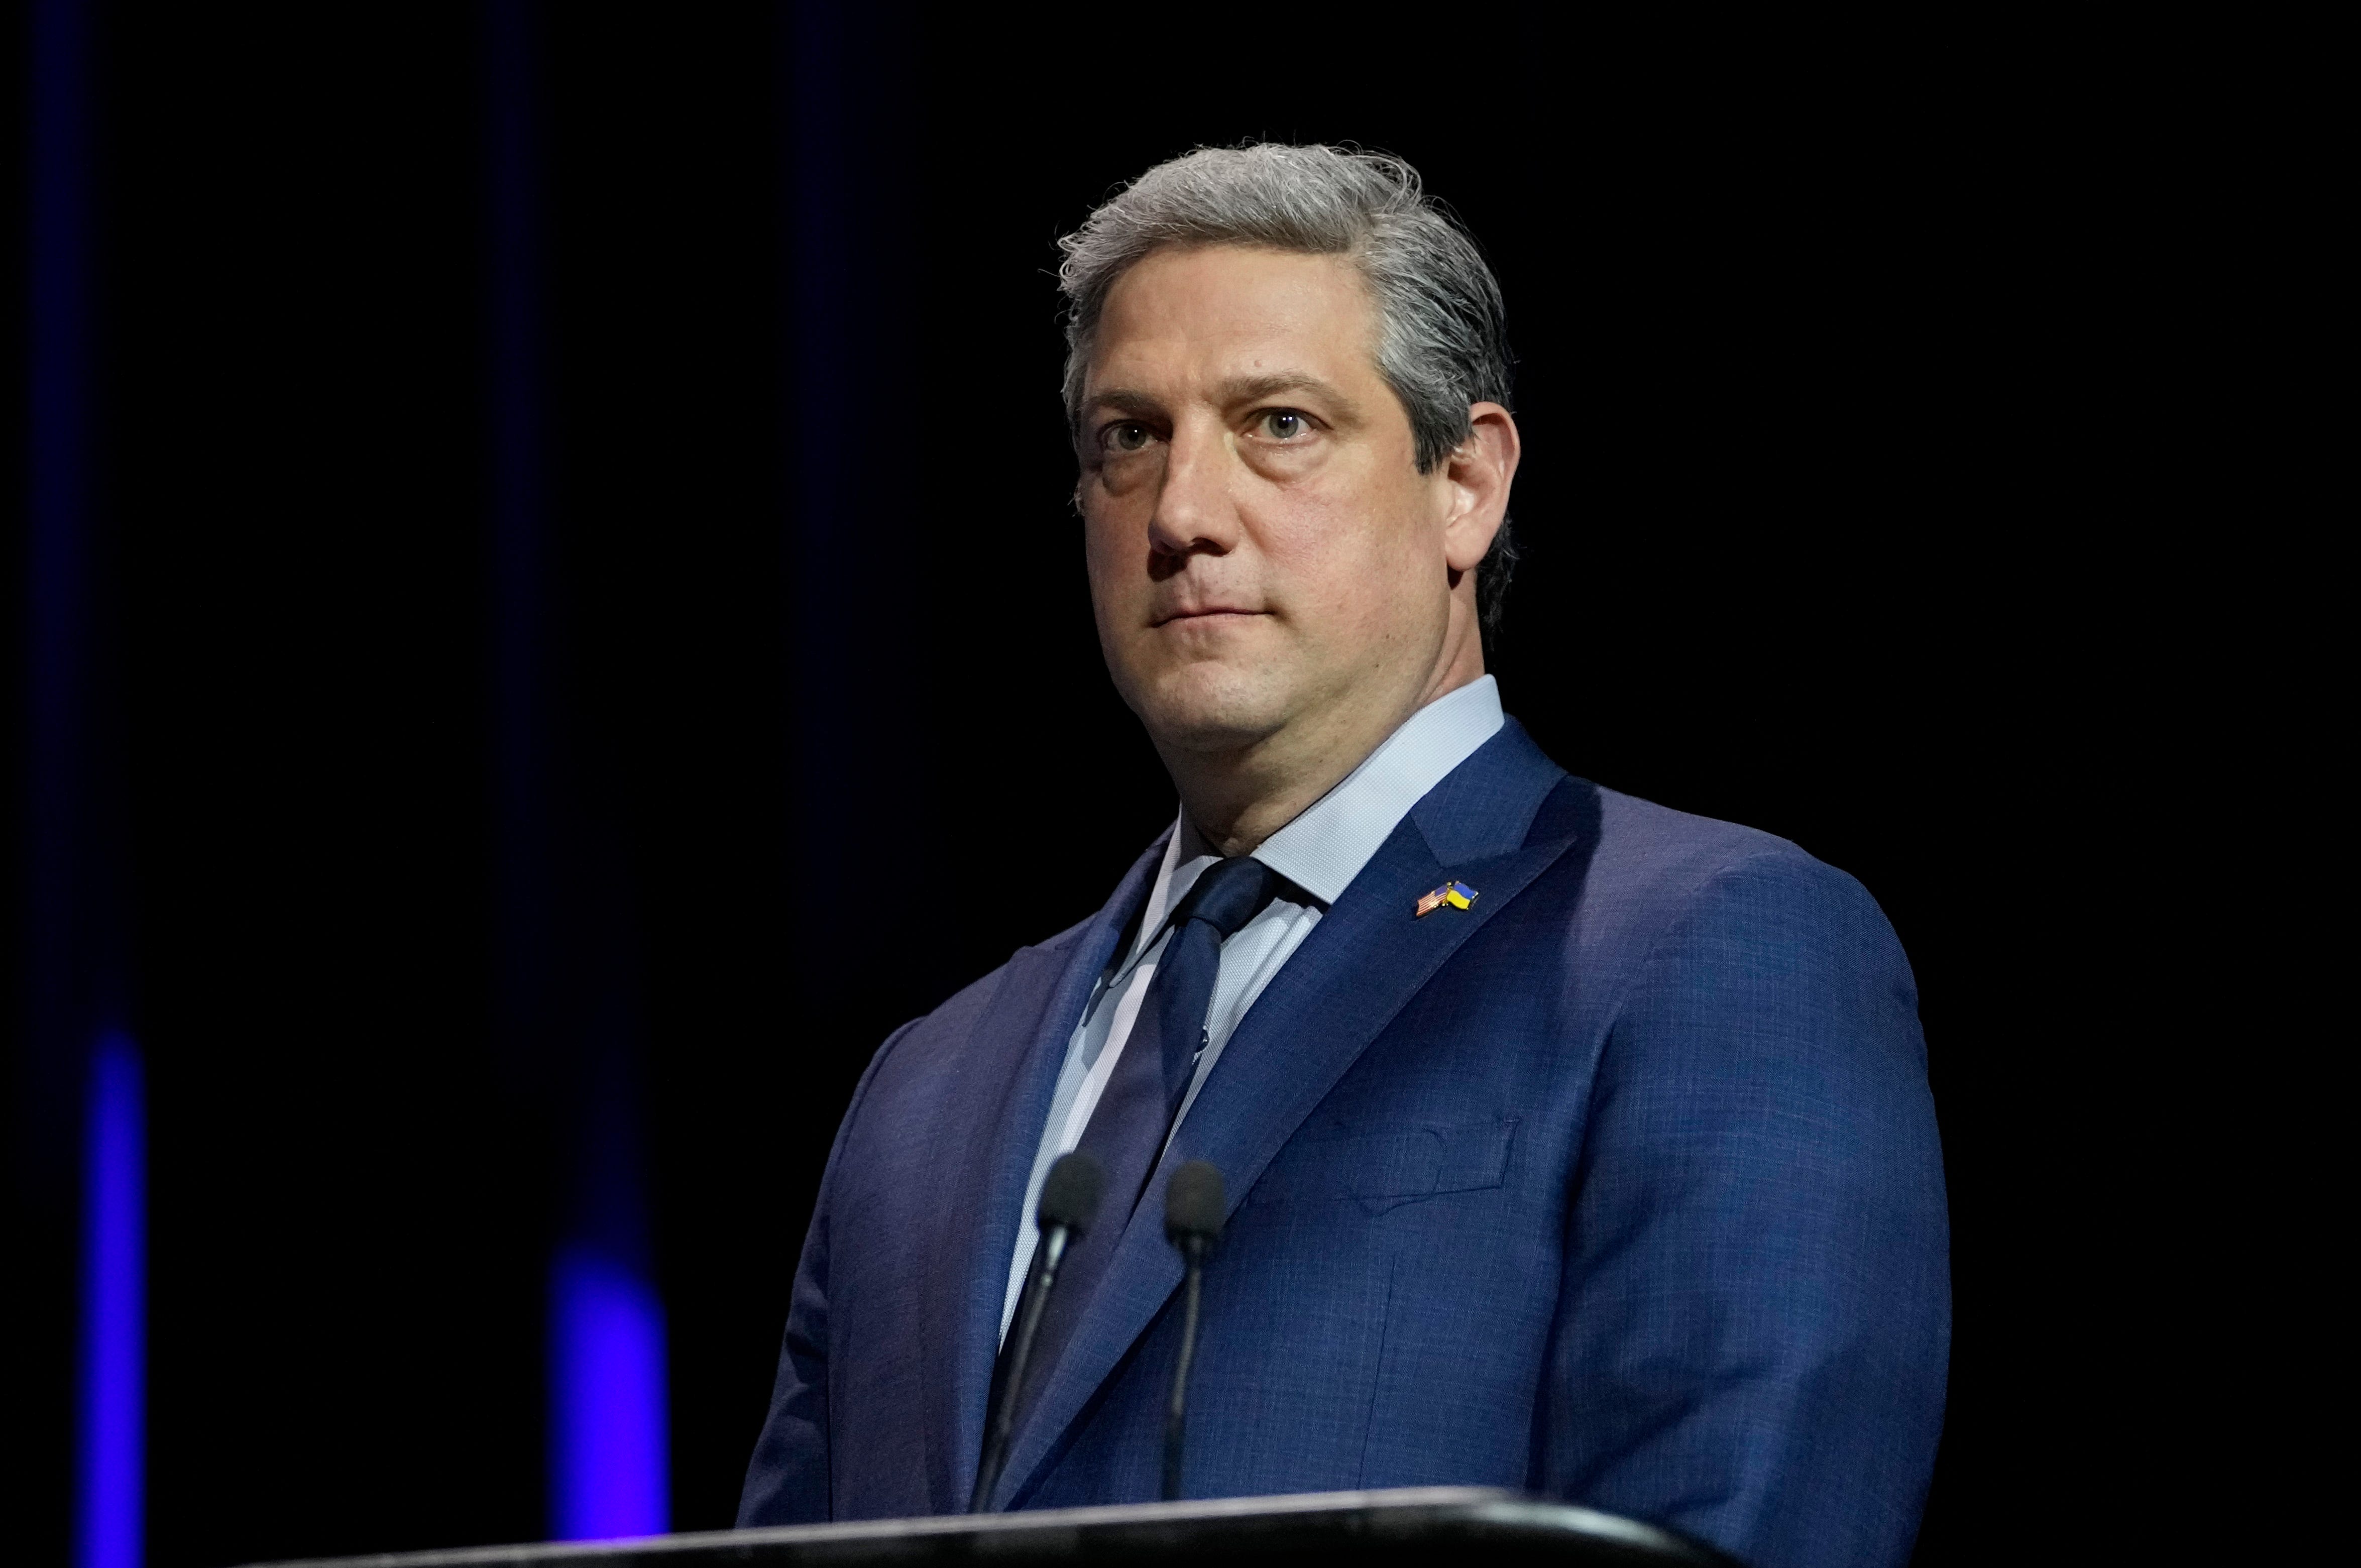 Mon., Mar. 28, 2022; Wilberforce, Ohio, USA; U.S. Senate Democratic candidate Rep. Tim Ryan (D-OH) stands at the end of Ohio’s U.S. Senate Democratic Primary Debate at Central State University. Mandatory Credit: Joshua A. Bickel/Ohio Debate Commission